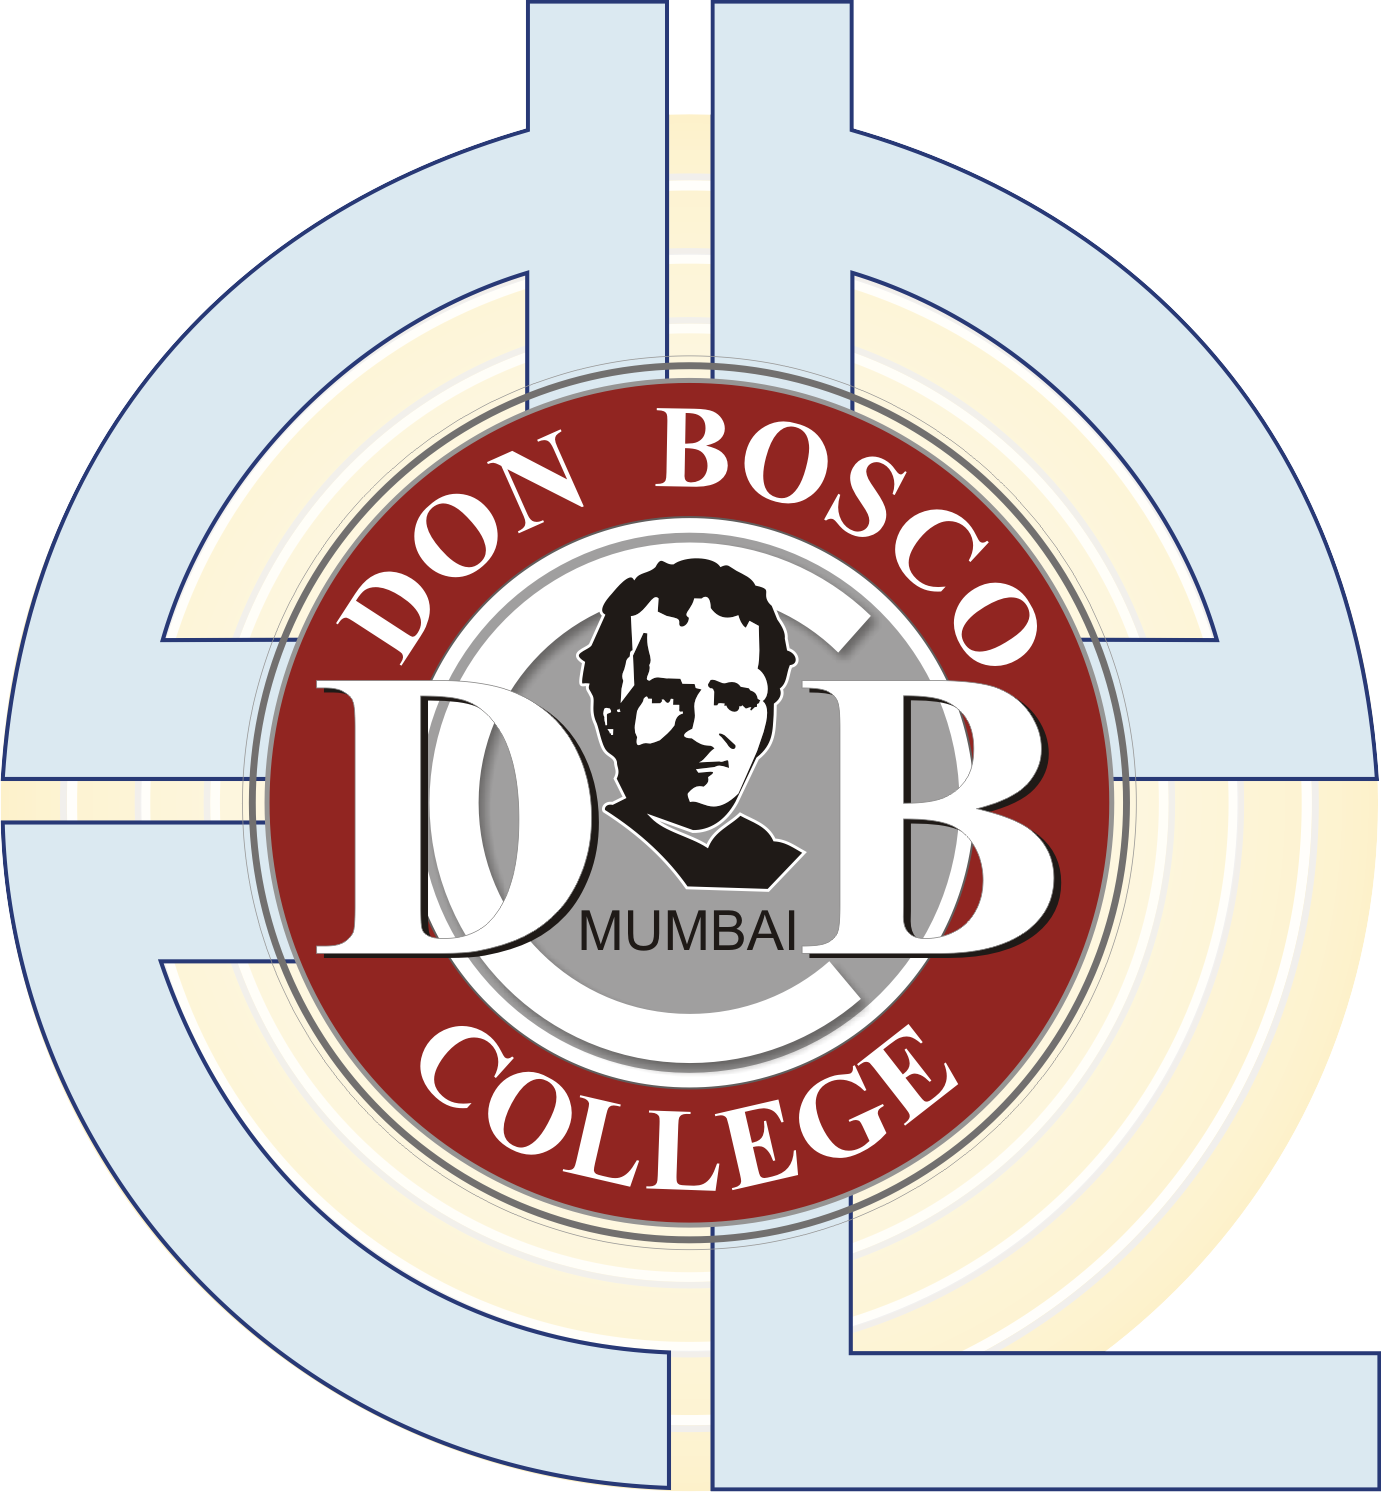 About Don Bosco College of Hospitality Studies